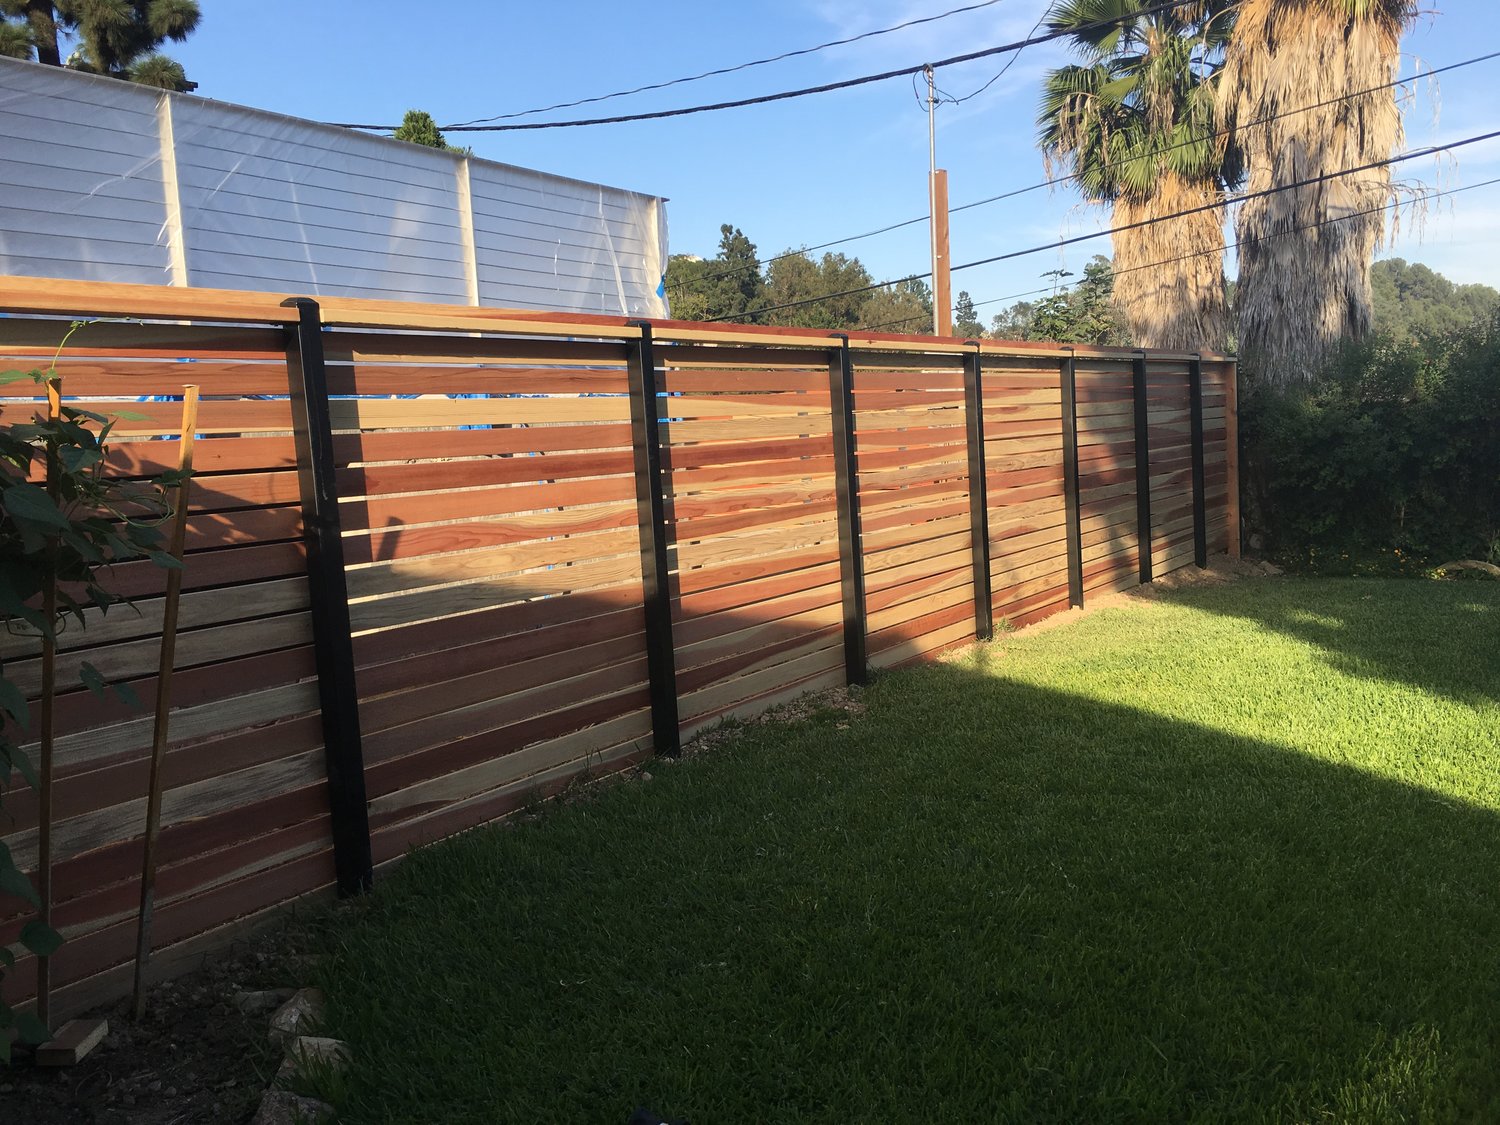 Fence City: Professional Fence Installation for Lowe's